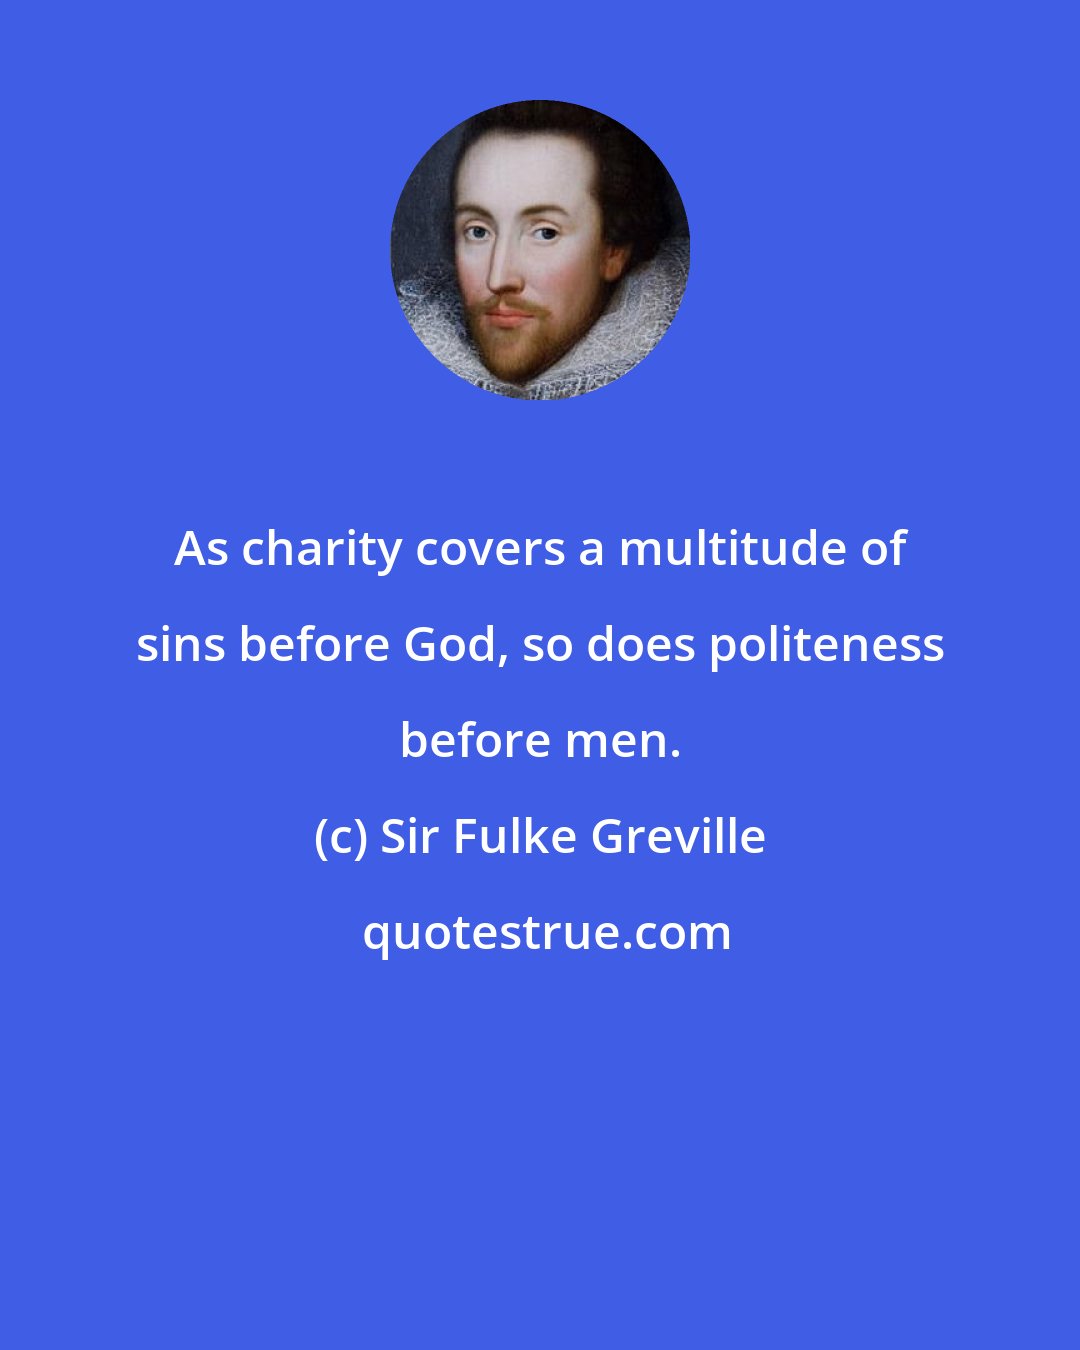 Sir Fulke Greville: As charity covers a multitude of sins before God, so does politeness before men.